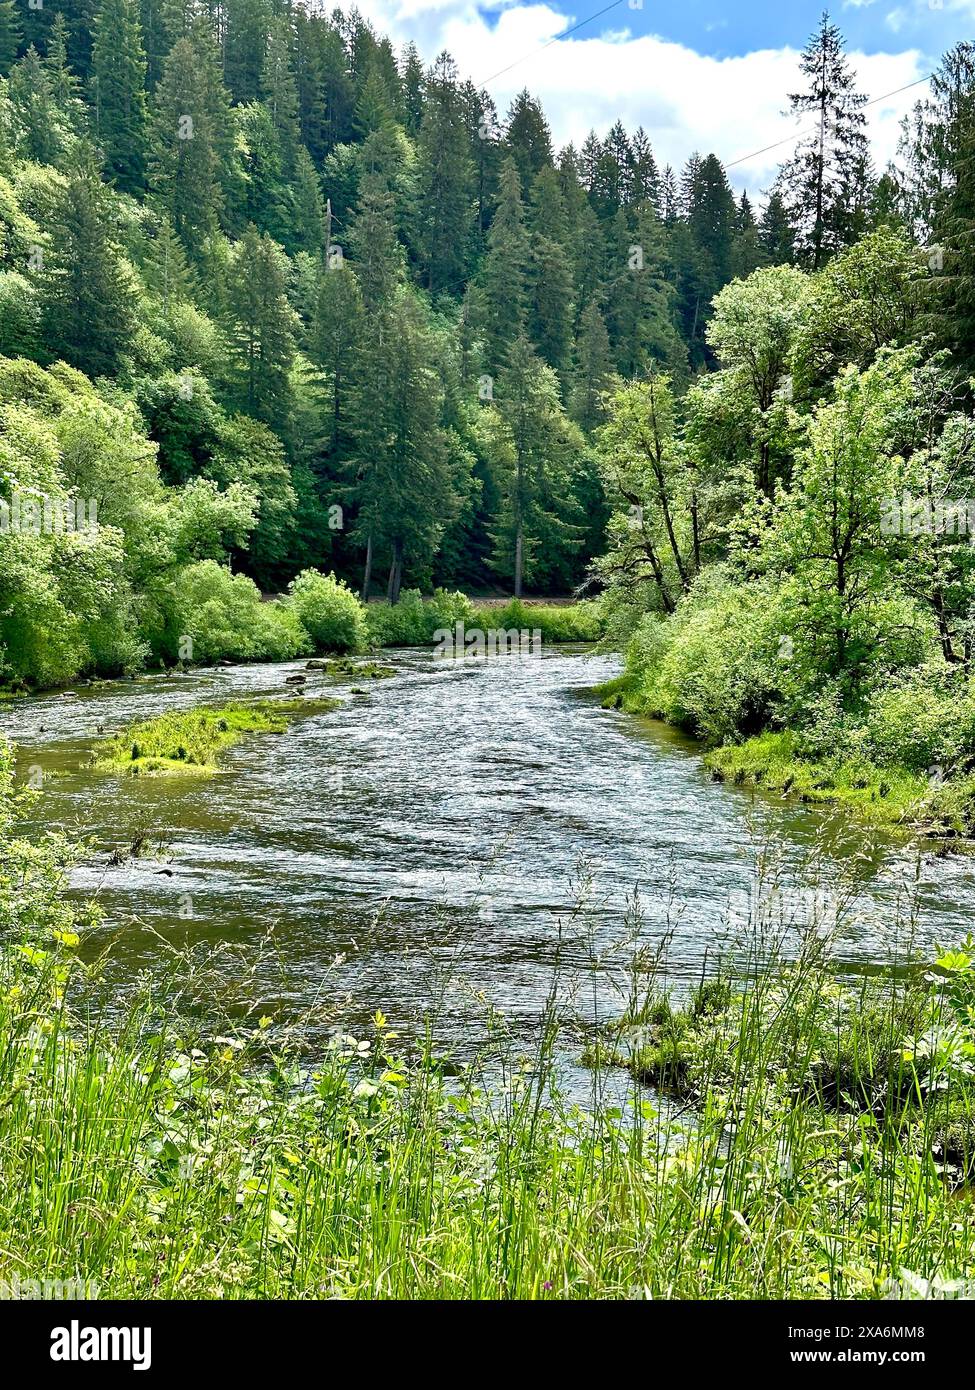 The calm waters of the Siuslaw River in Deadwood OR surrounded by dense green trees and a lush forest Stock Photo